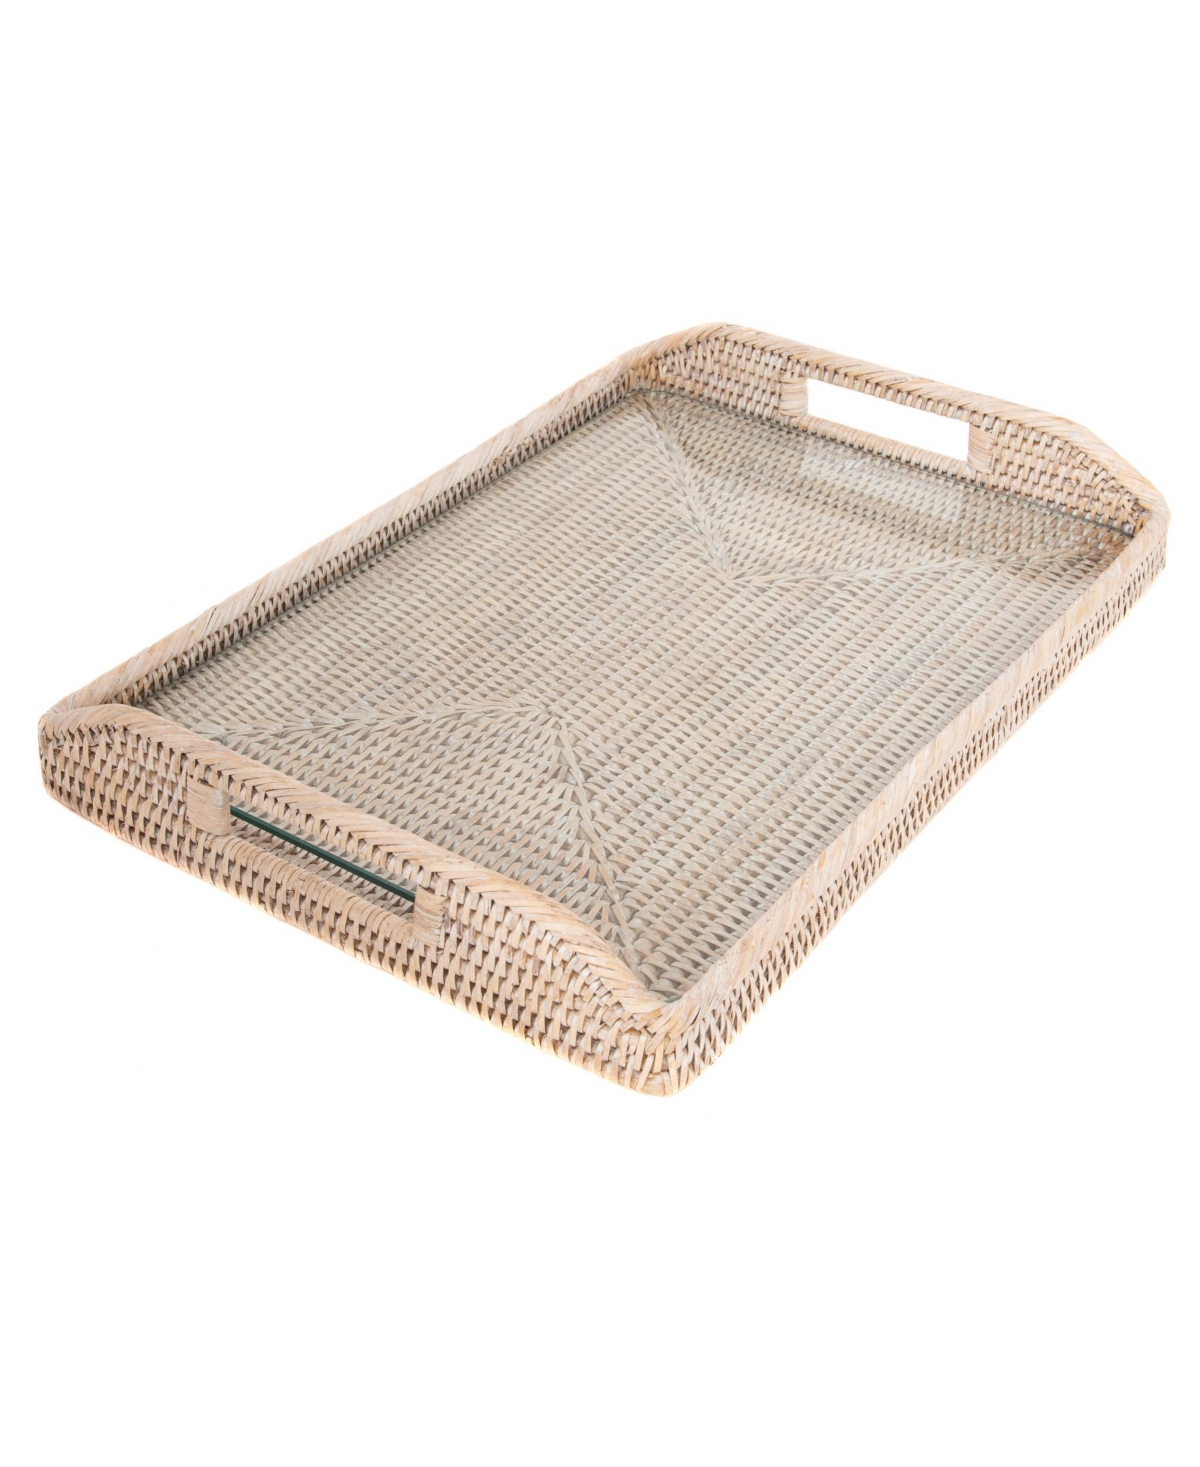 Artifacts Trading Company Artifacts Rattan 17" Rectangular Tray With Glass Insert In Open White